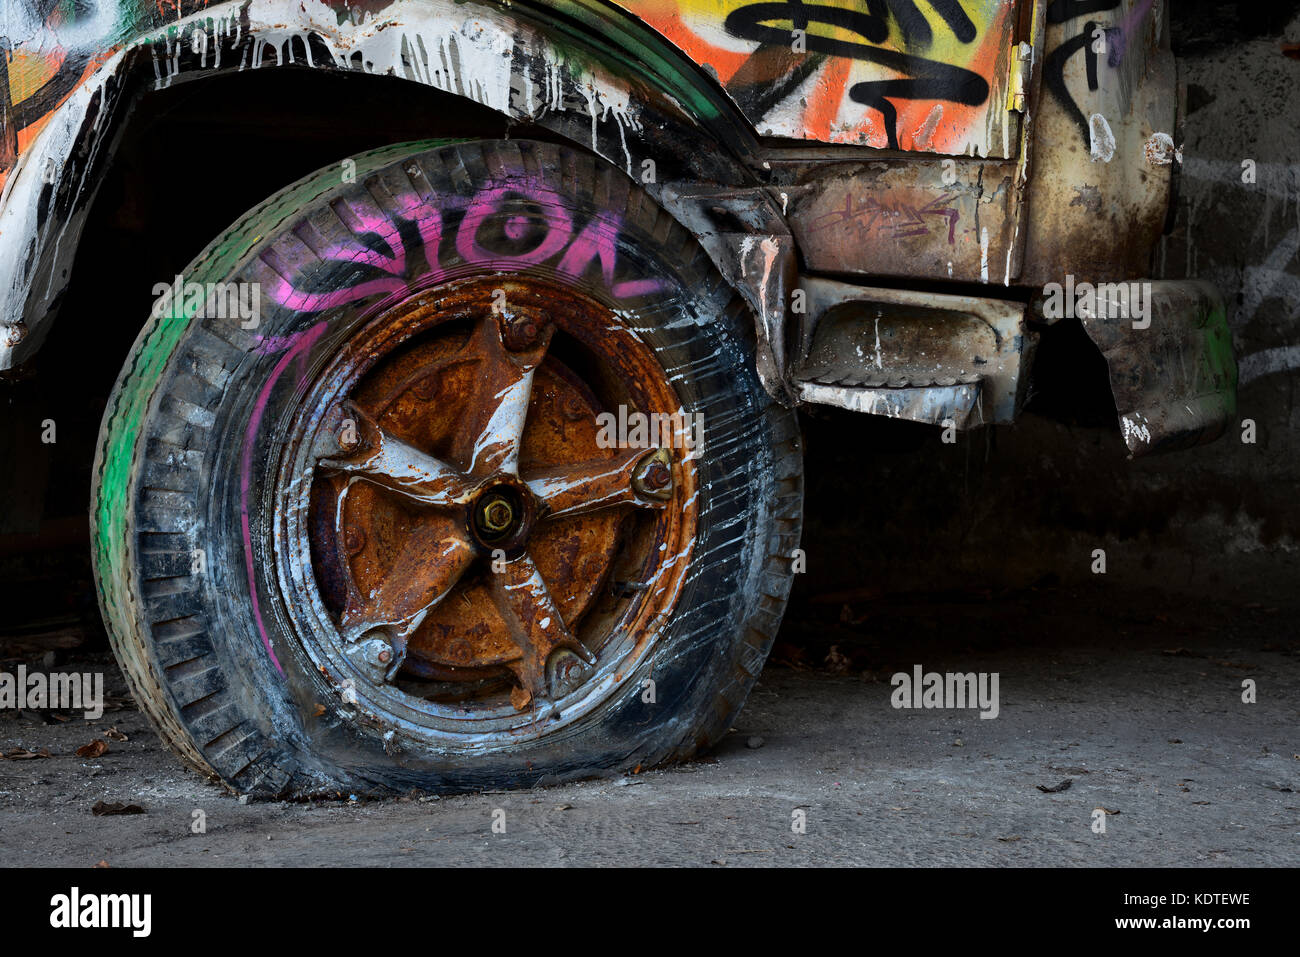 Abandoned spray painted vehicle with punctured tire Stock Photo